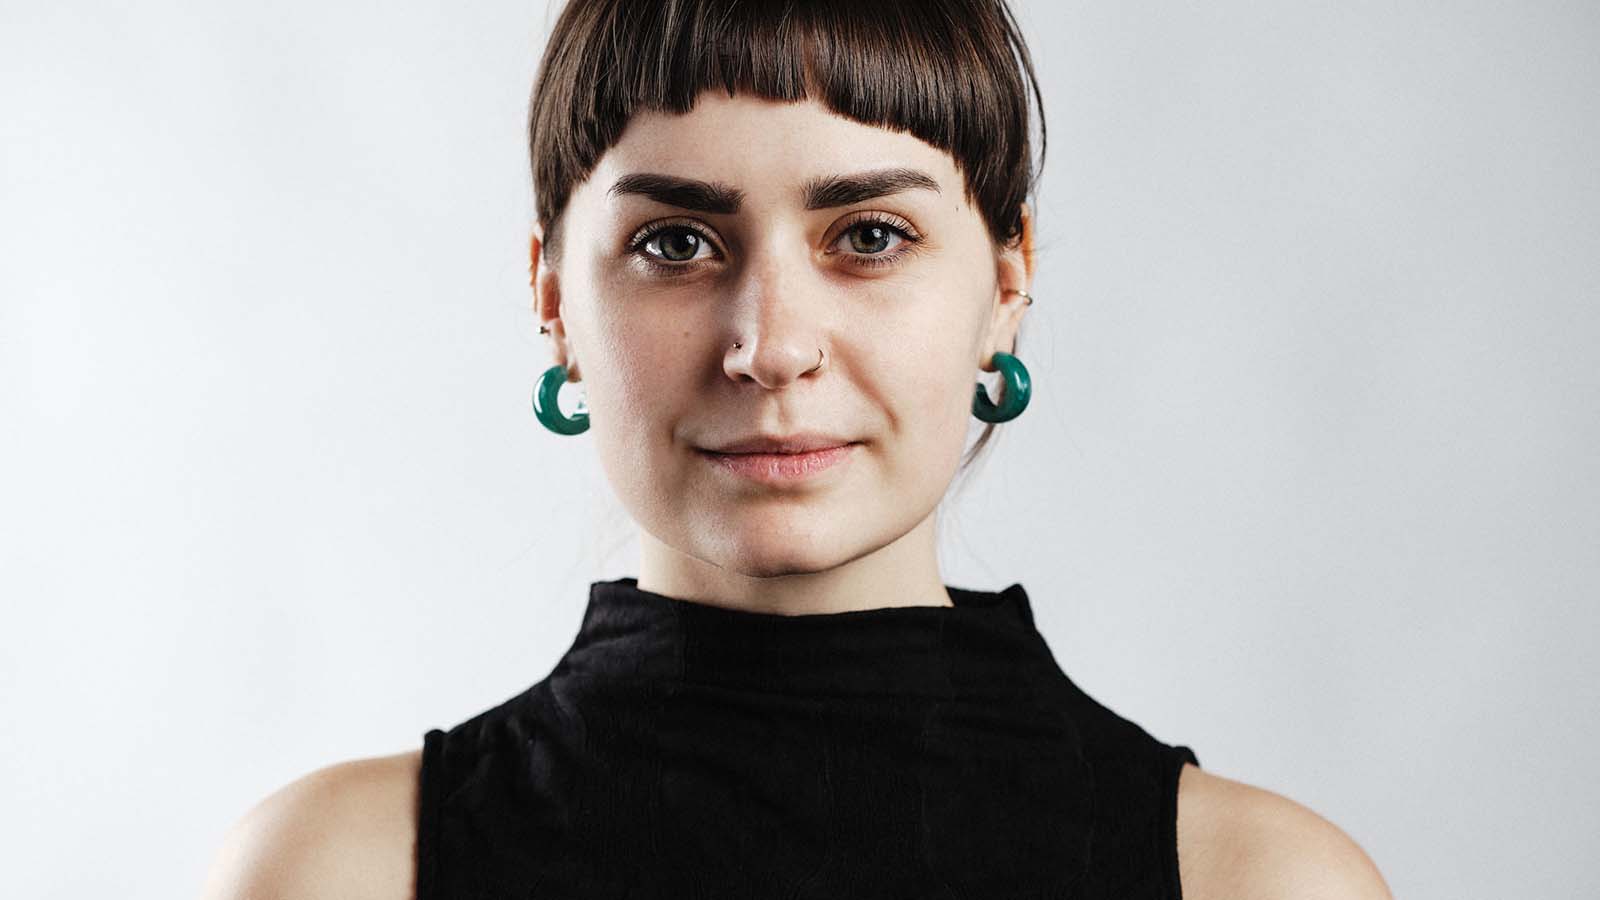 A woman with brown hair and a fringe, wearing a sleeveless black turtleneck top. This is Amy Laurenson.